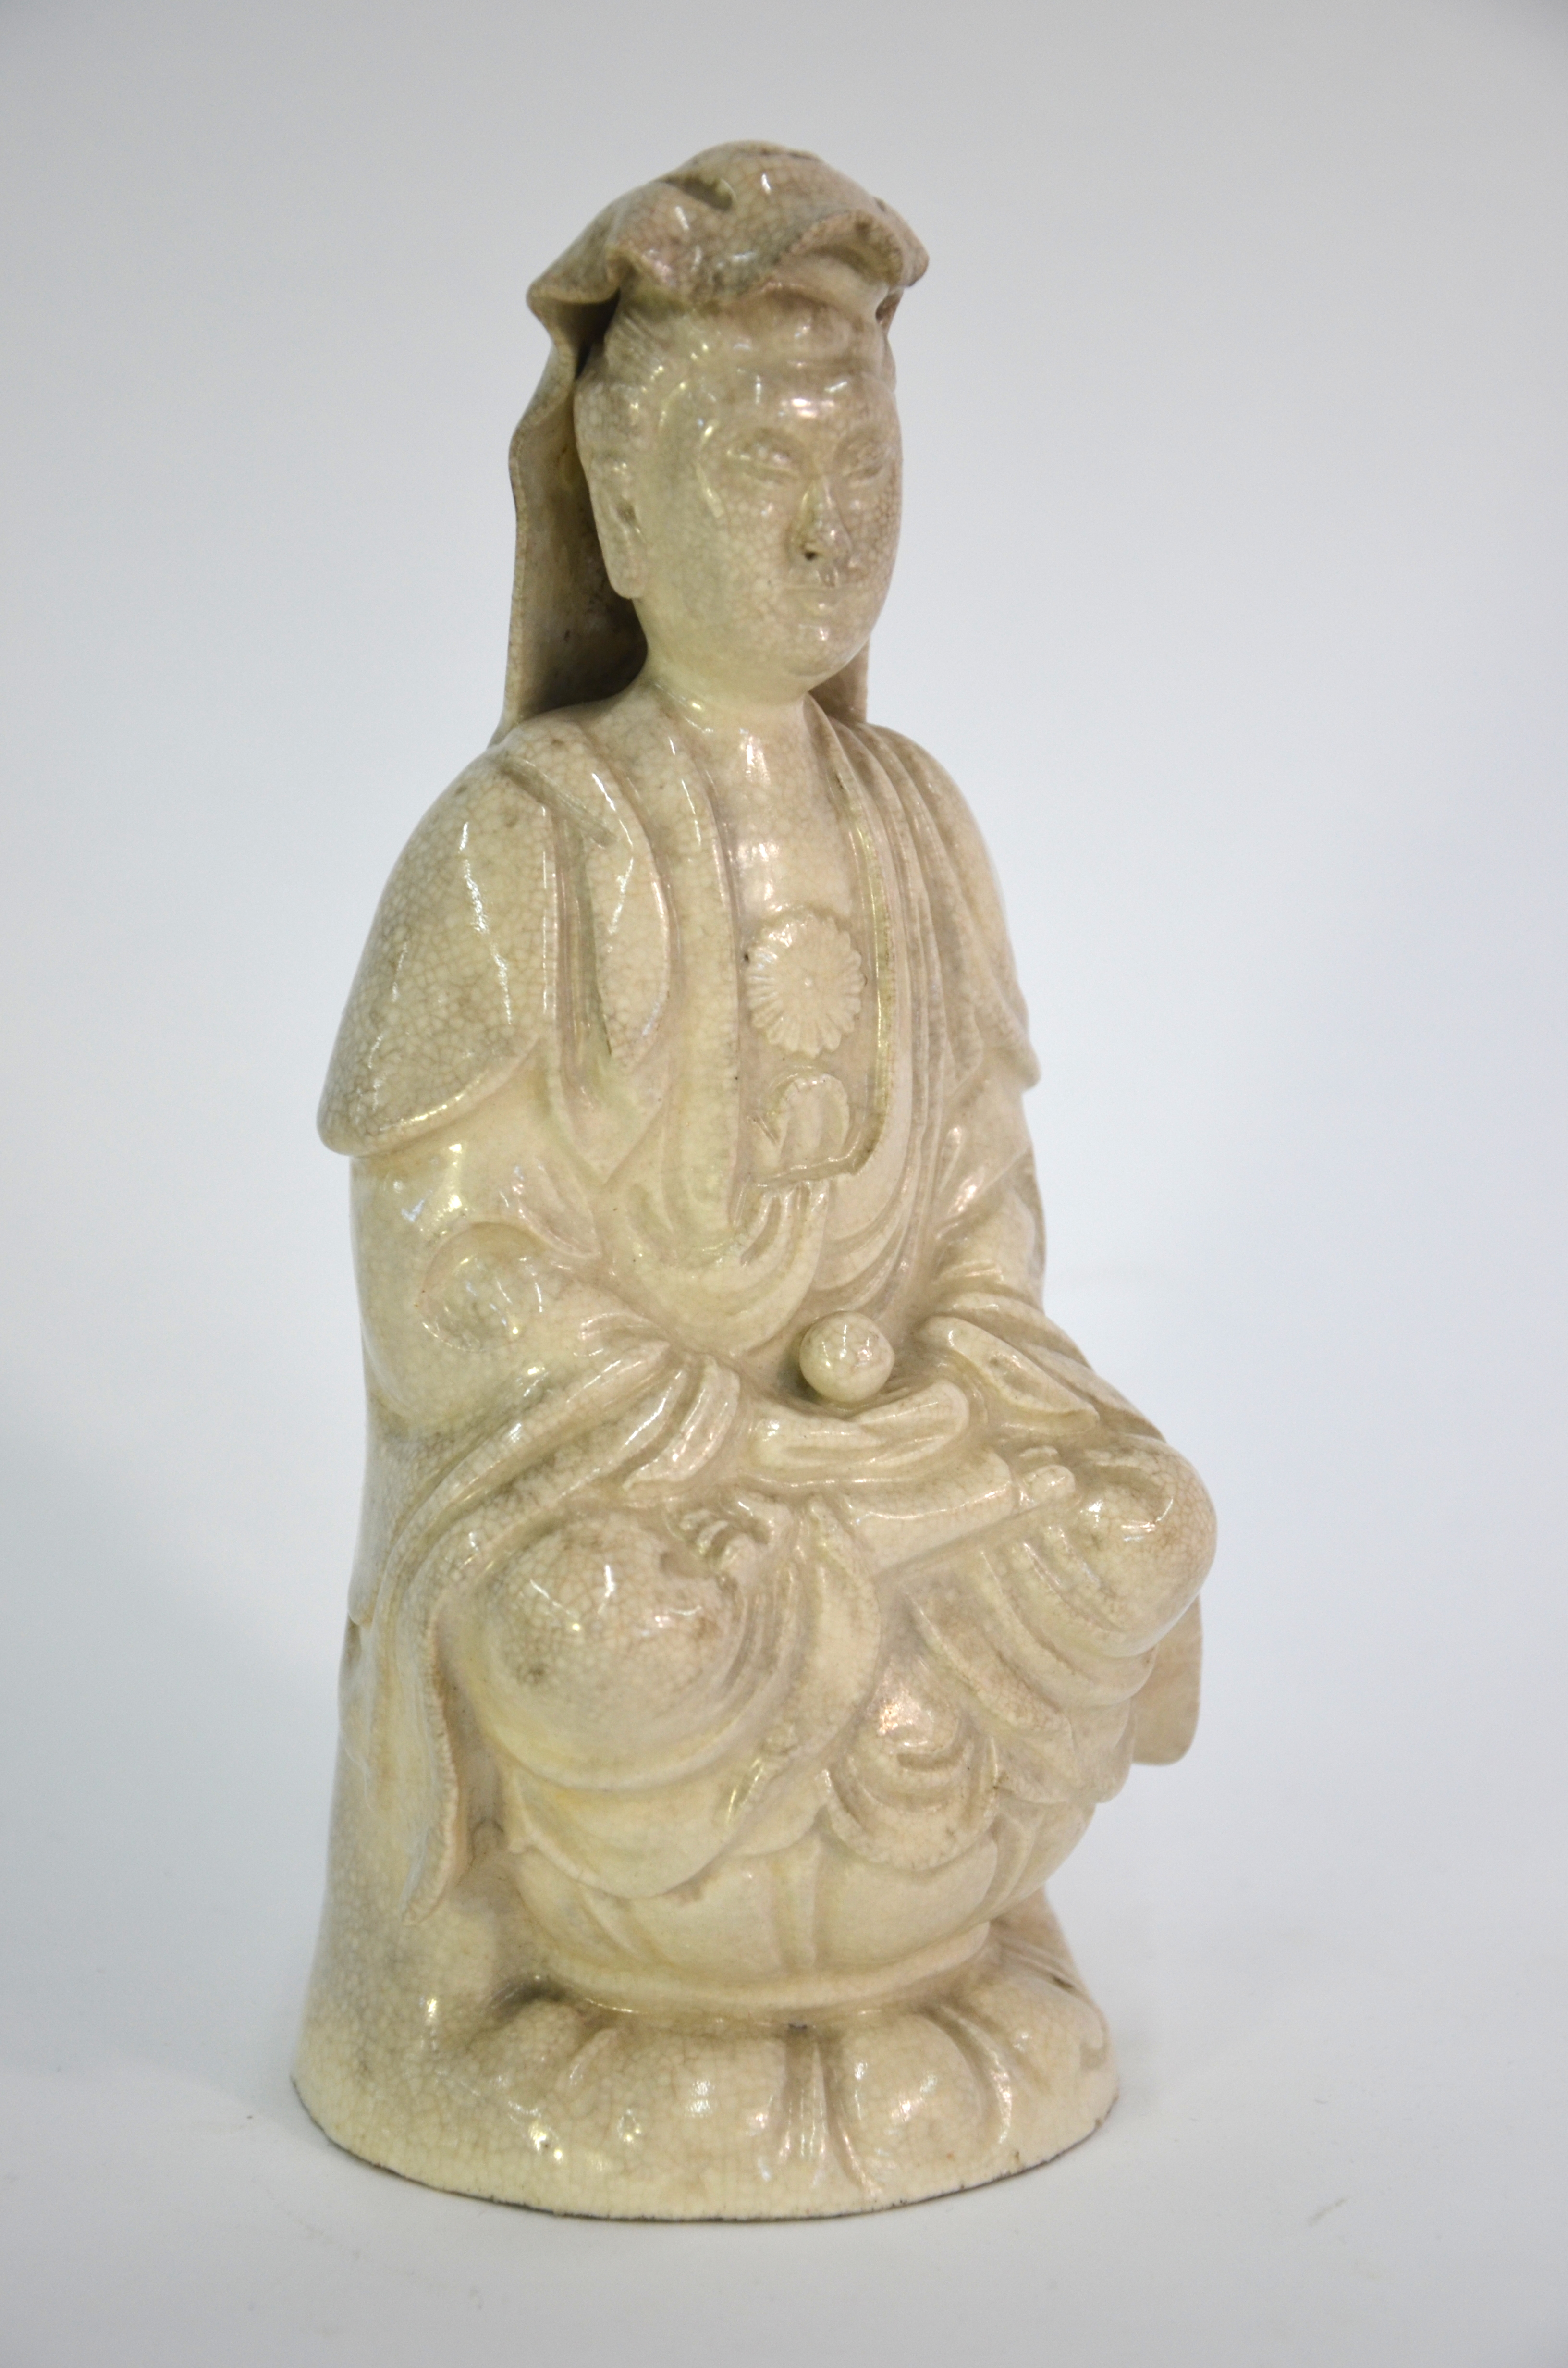 A blanc-de-chine style figure of Guanyin, the Bodhisattva of Mercy; seated in dhyanasana on a - Image 2 of 8